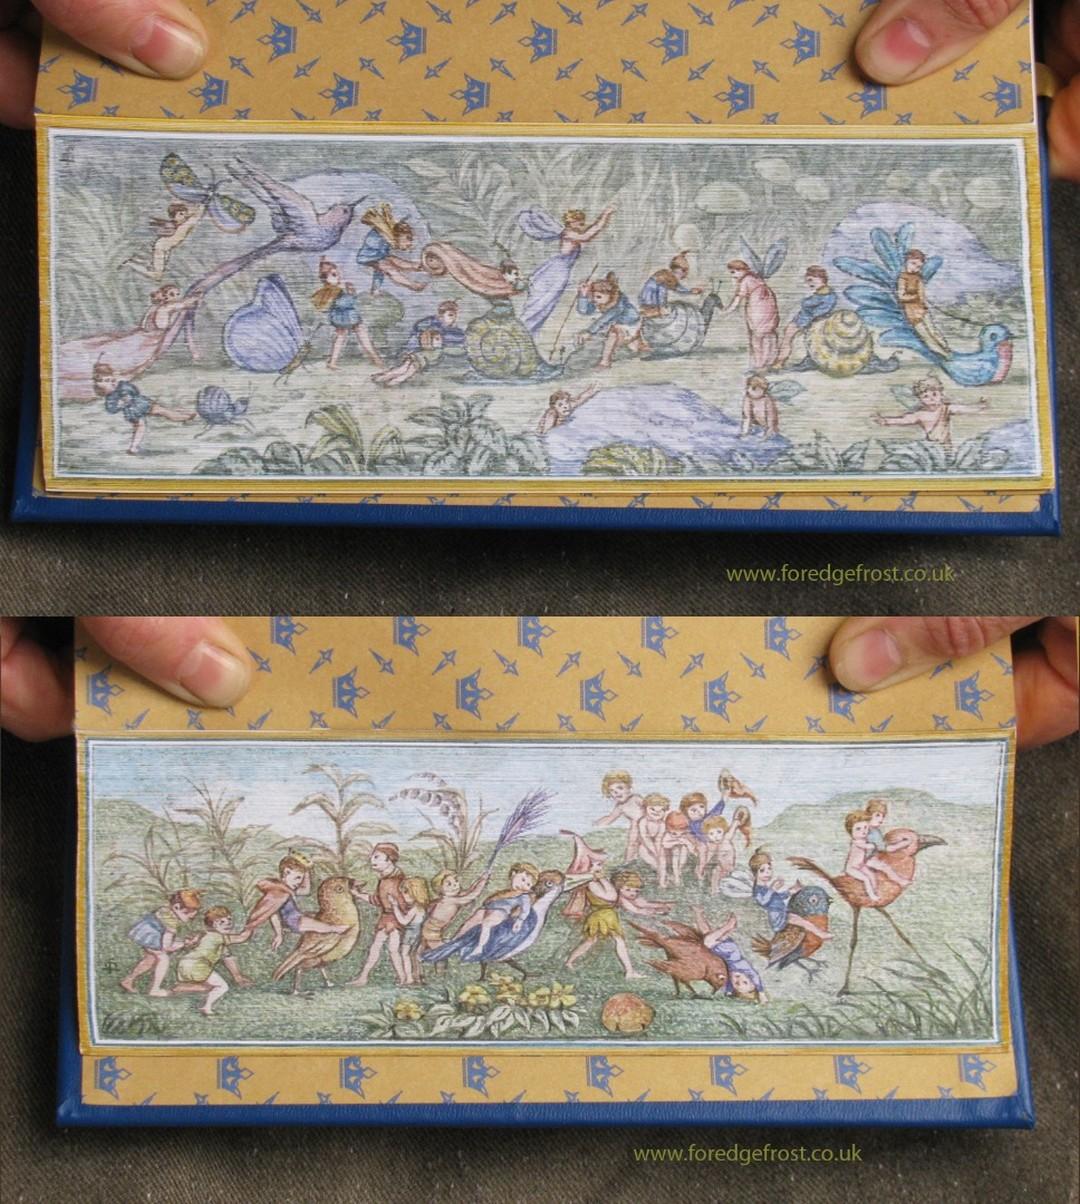 Two-way double FEP on "The Blue Fairy Book" by Andrew Lang. (Courtesy of <a href="https://www.foredgefrost.co.uk/">Martin Frost</a> <a href="https://www.instagram.com/foredgefrost1/">@foredgefrost1</a>)